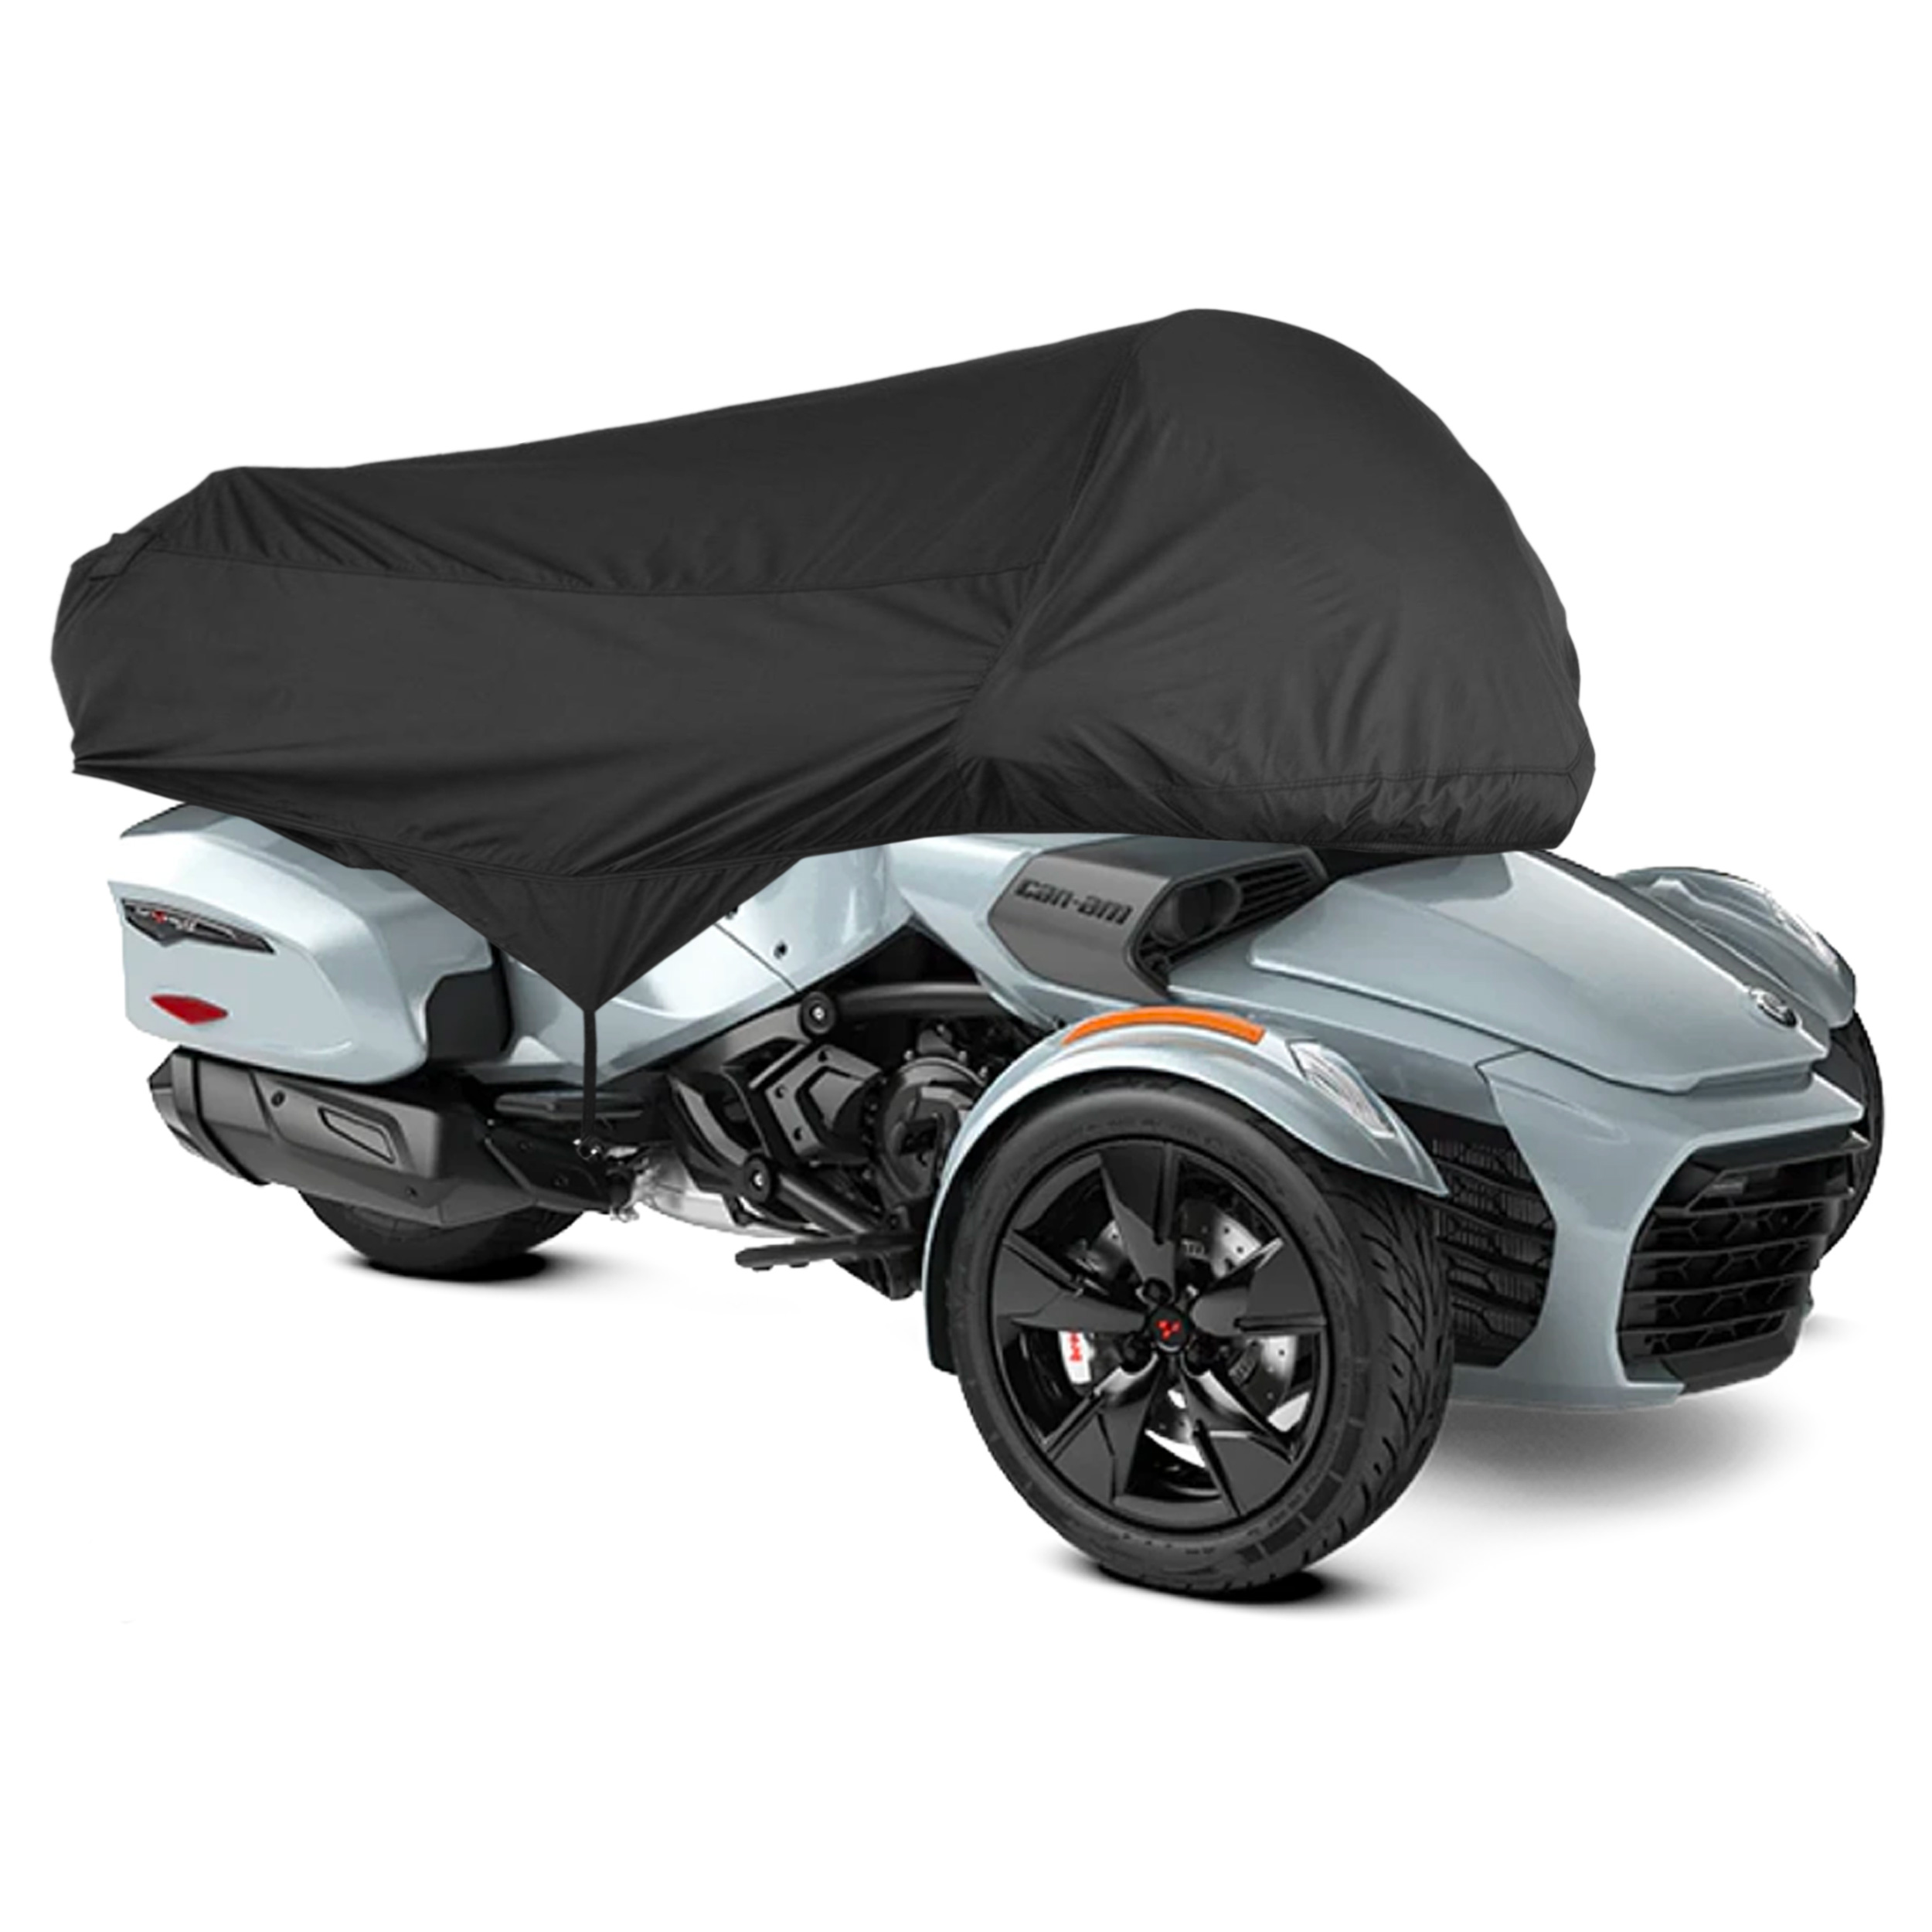 North East Harbor Half Cover Compatible with Can-Am Spyder 2016-2022 F3-T Models (With Trunk) | Waterproof, Weather Resistant Fabric, Black